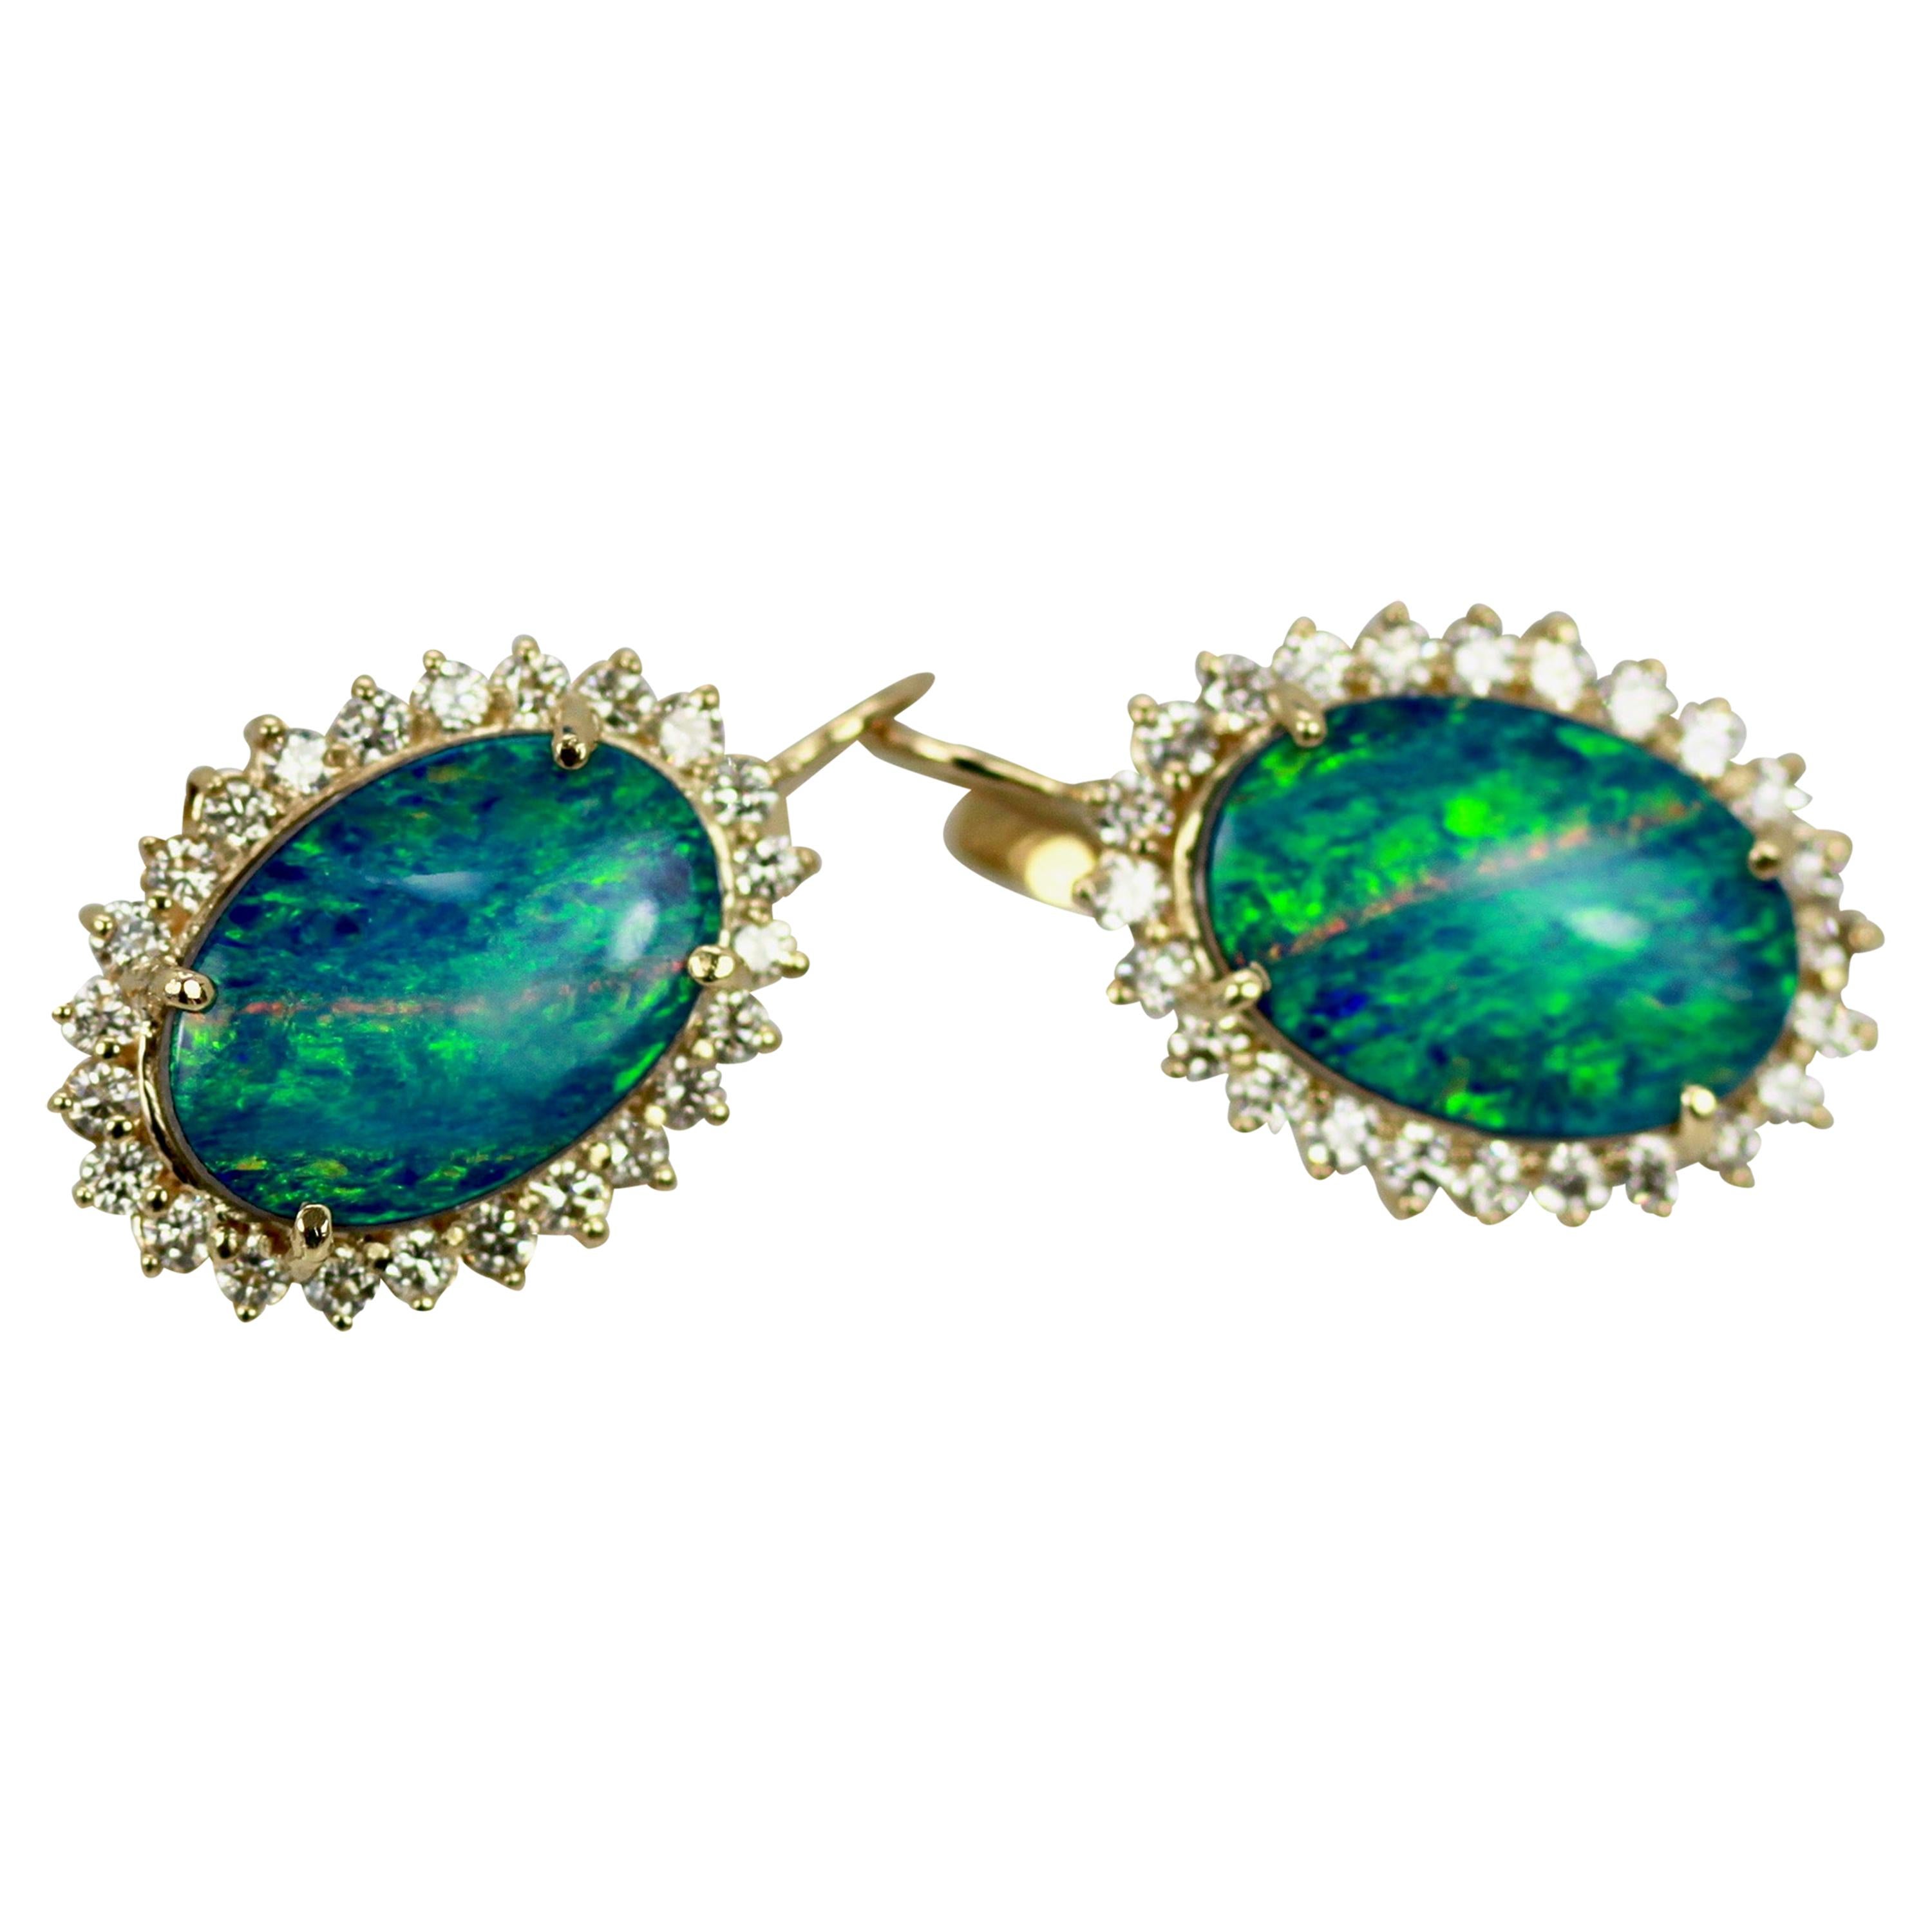 These Black Opal earrings are oval with a diamond surround.  The Opals are 18.54mm x 13.08mm, solid Opal not triplet or doublet.
With the surround of Diamonds they measure 23.26mm x 17.51mm.  These weight 10.2 grams there are 1.88 Carats of Diamonds